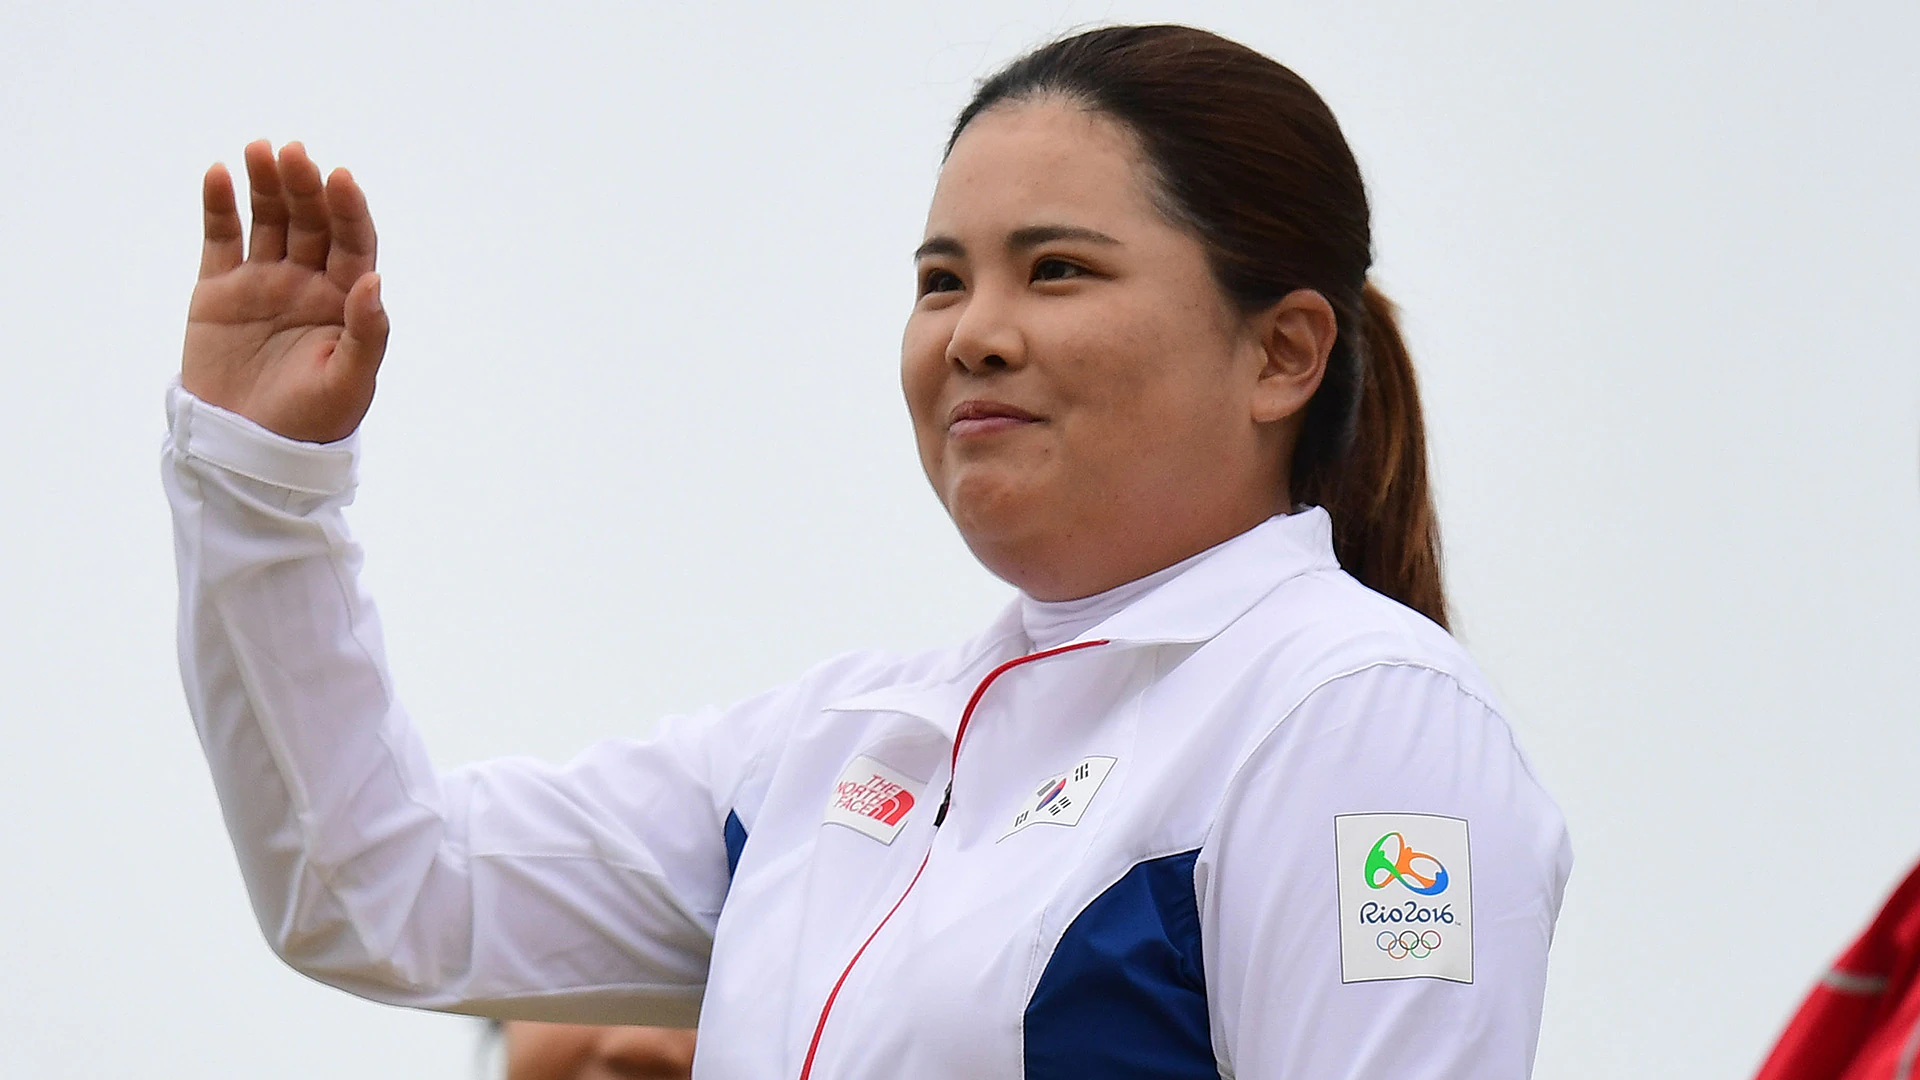 The LPGA players most impacted by delay of Tokyo Olympics